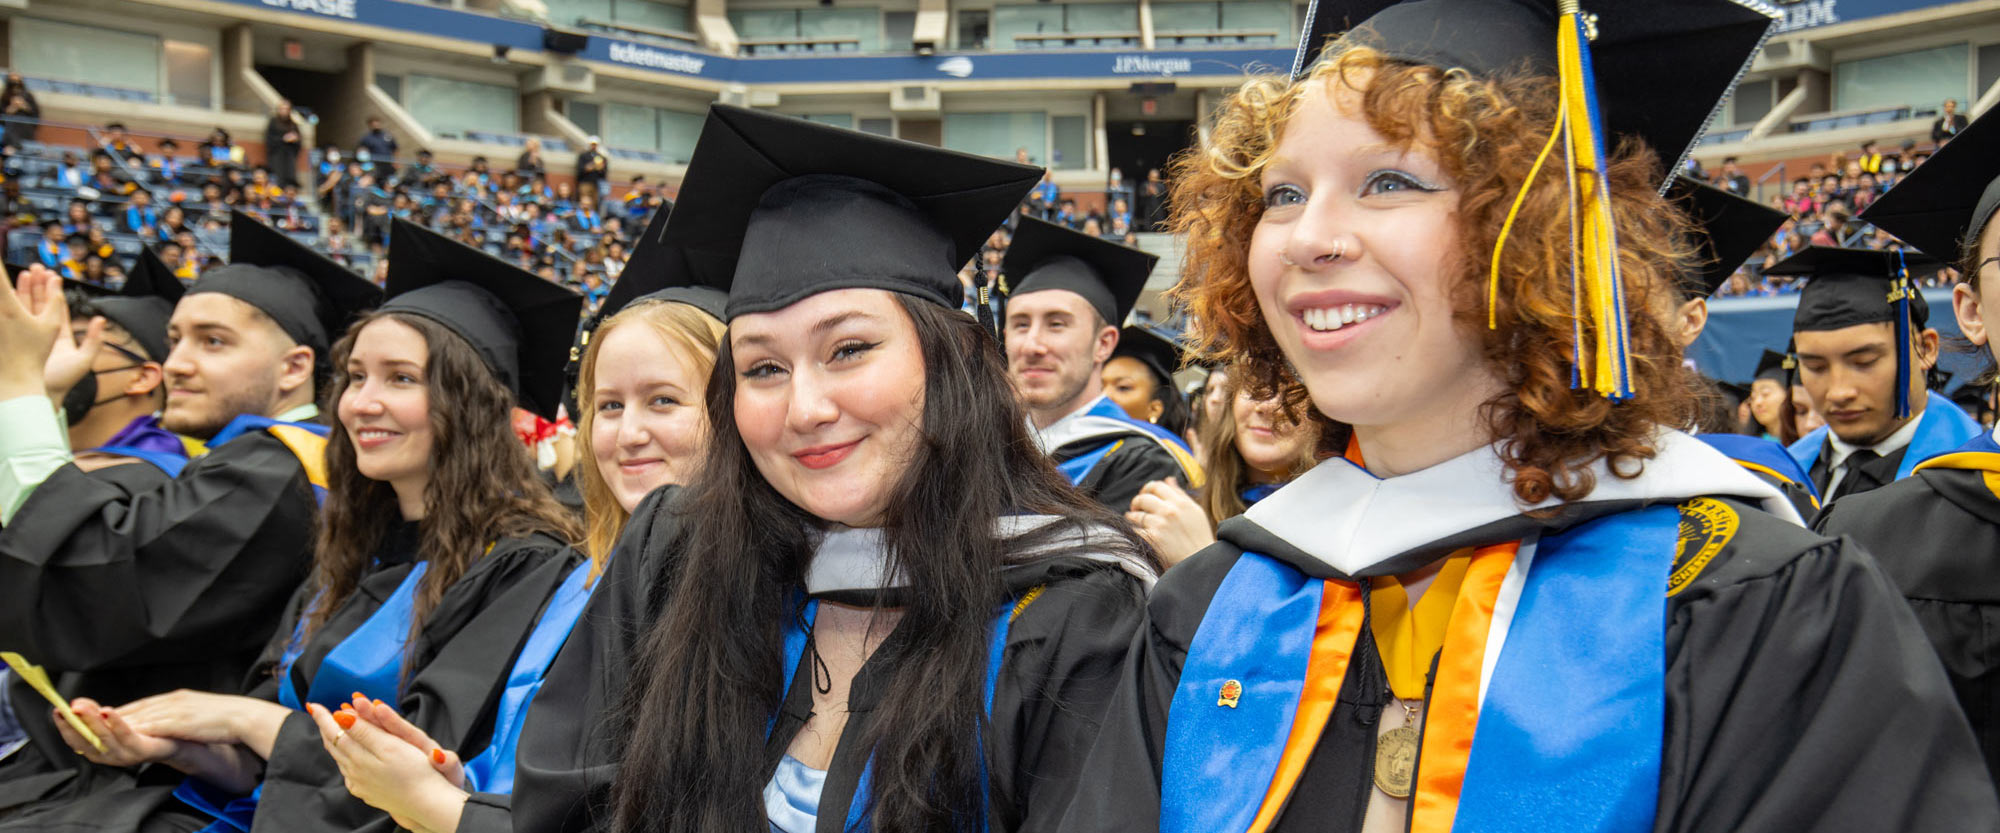 Commencement 2020, 2021, and 2022 Graduates Pace University New York